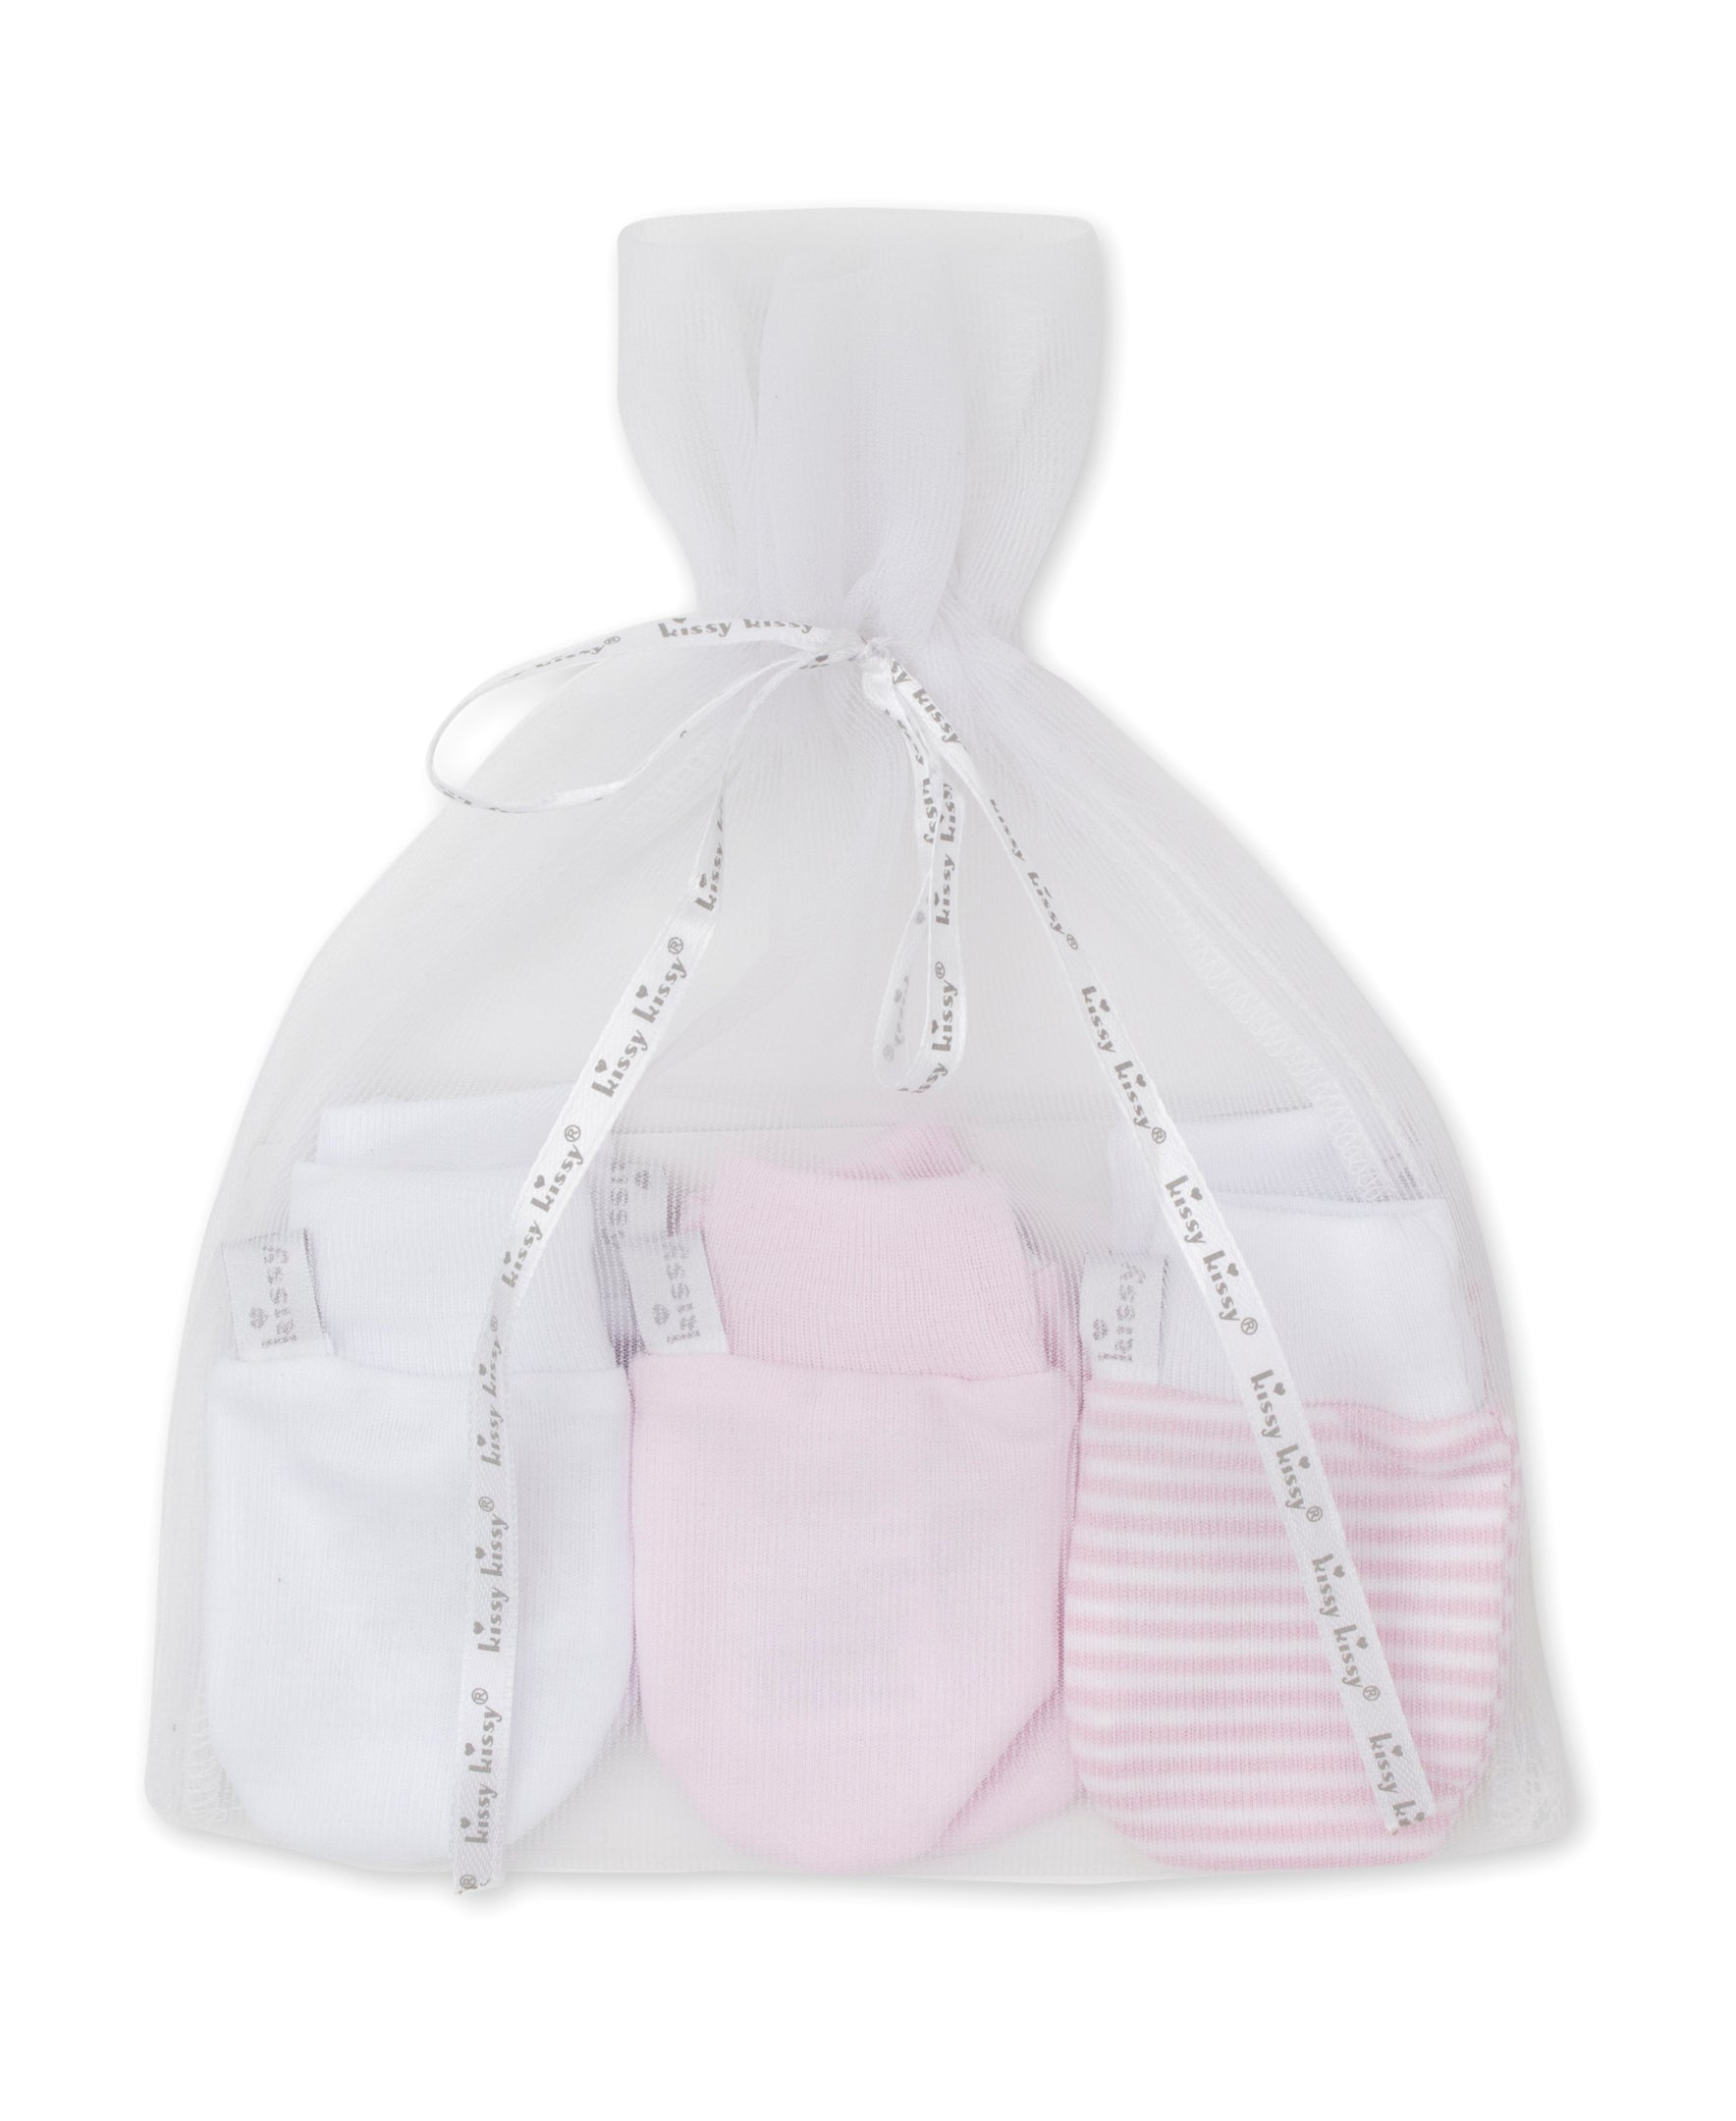 Simple Stripes 3 Pack Pink Mittens Set w/ Tulle Bag - Kissy Kissy